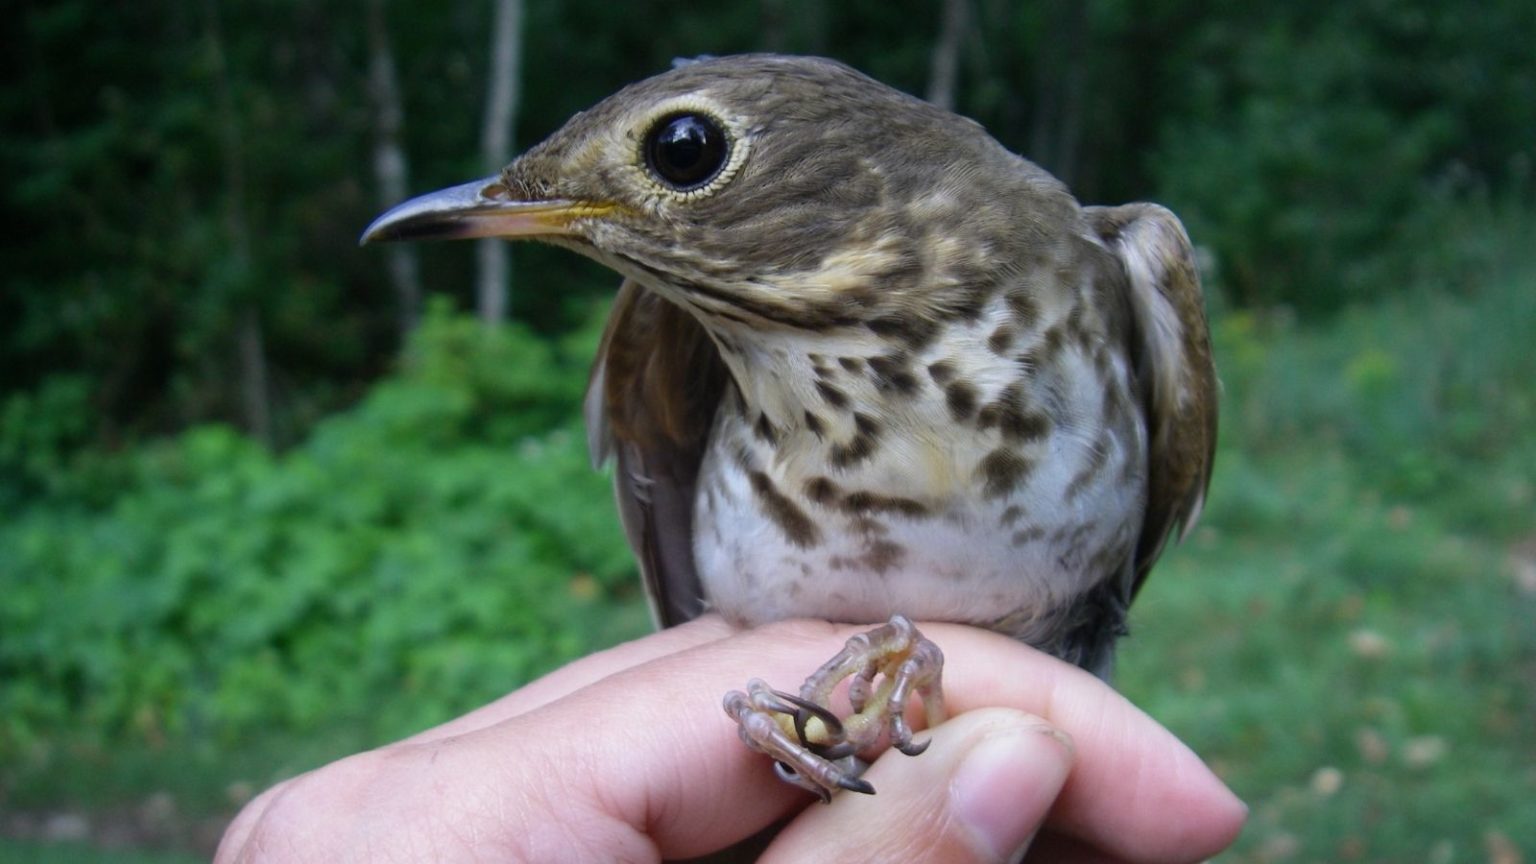 A Swainson's thrush, one of the birds studied by Kira Delmore